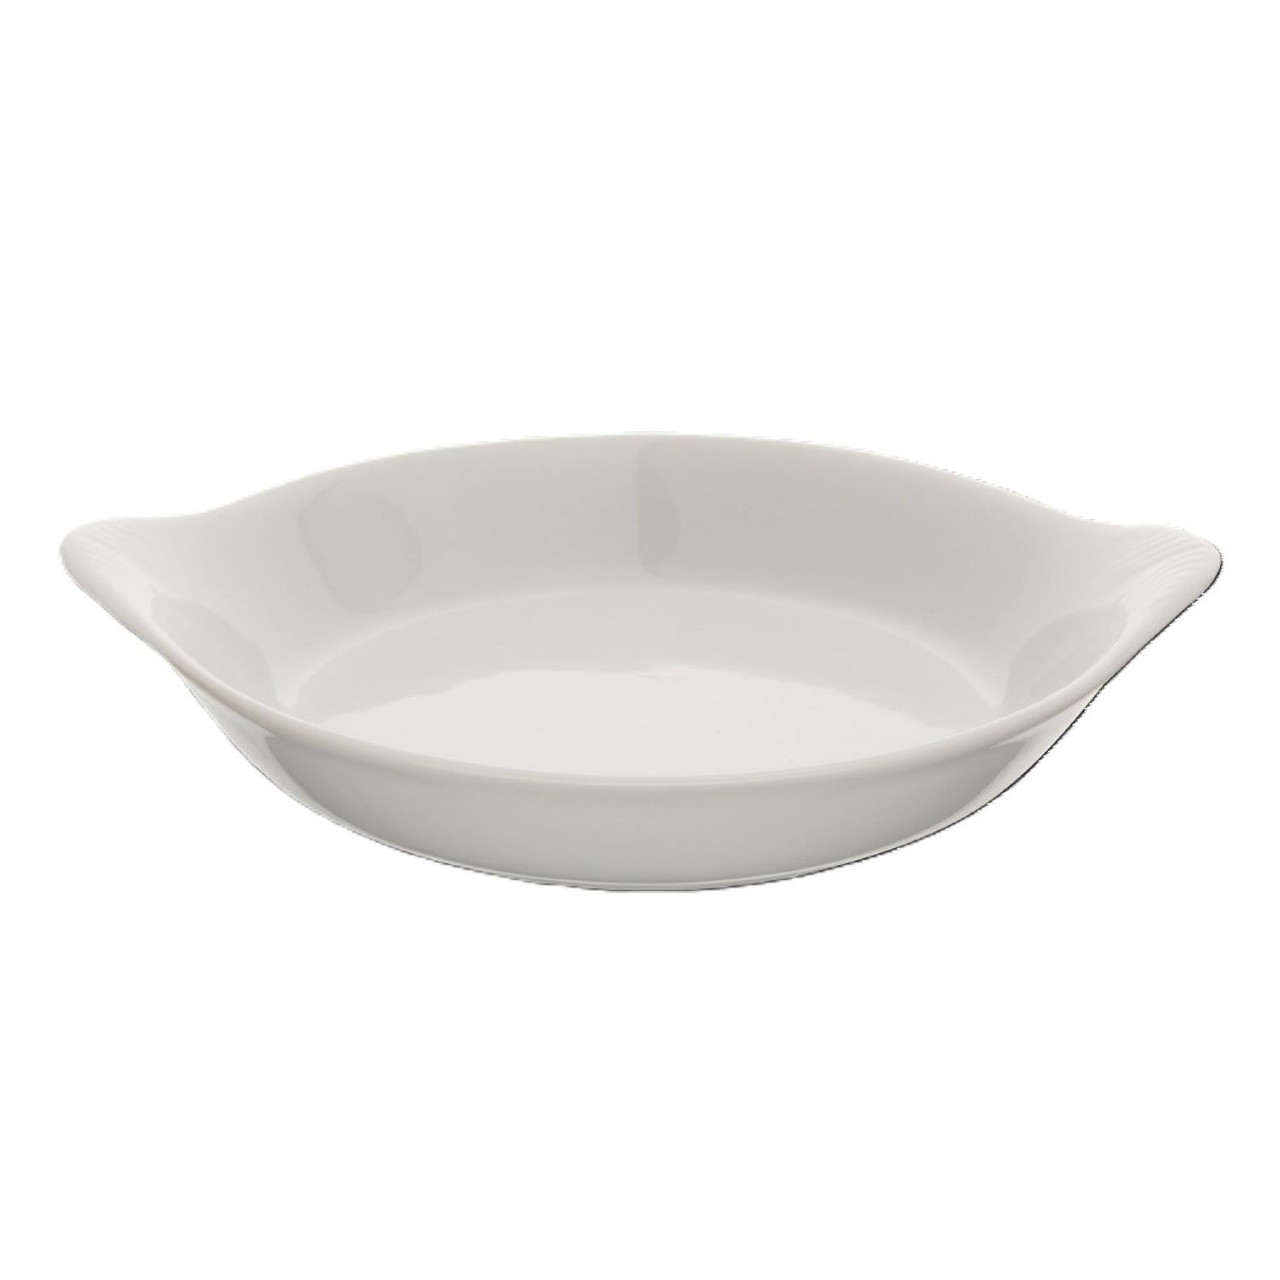 Browne Foodservice 10-Ounce White Round Au Gratin Baker (BC 564010W)